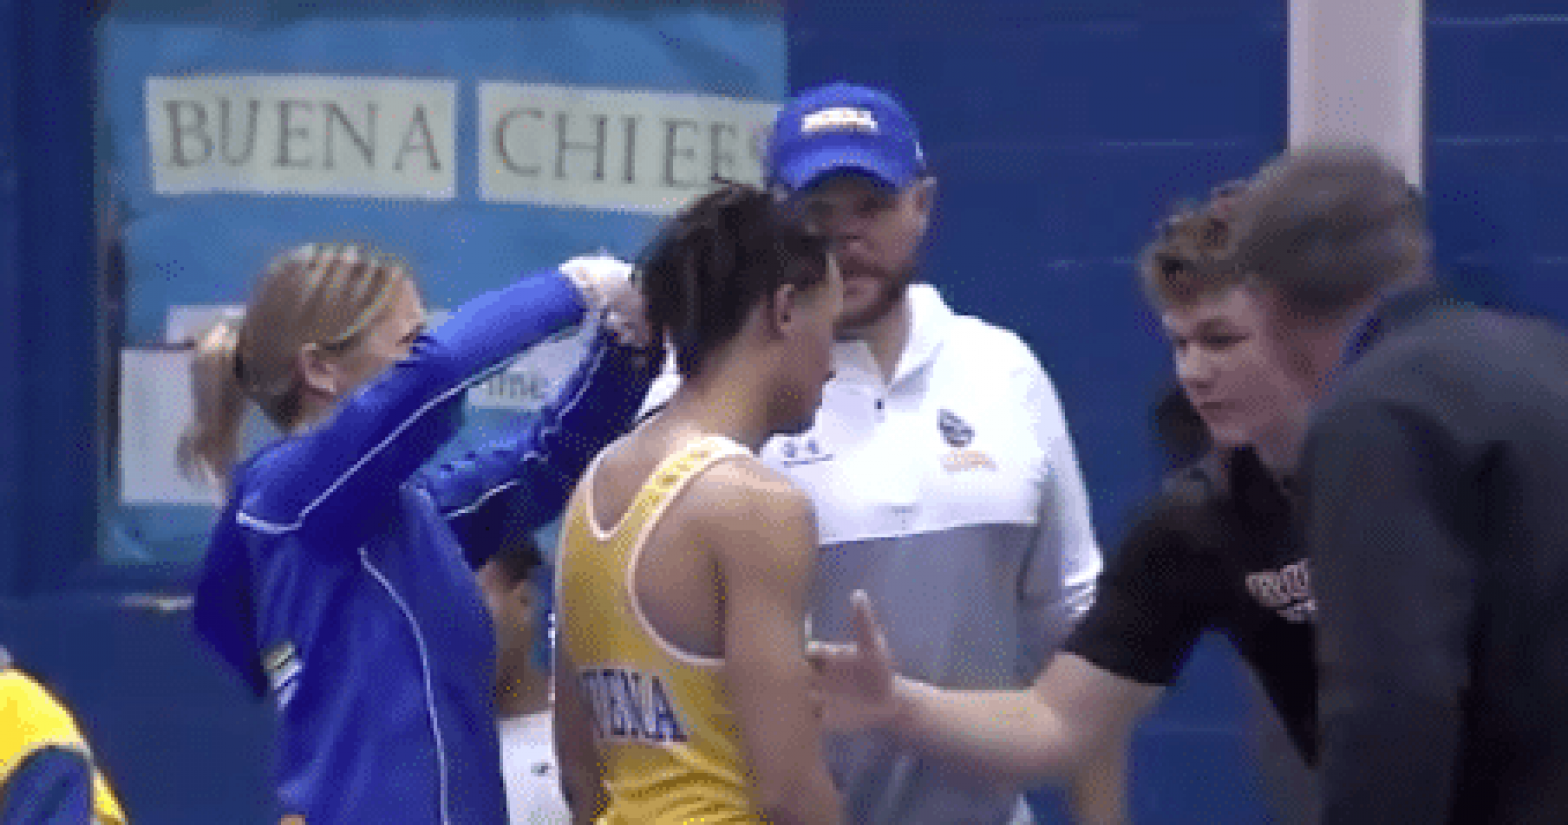 White Referee Who Forced Black High School Wrestler To Cut His Locs Alleges Defamation